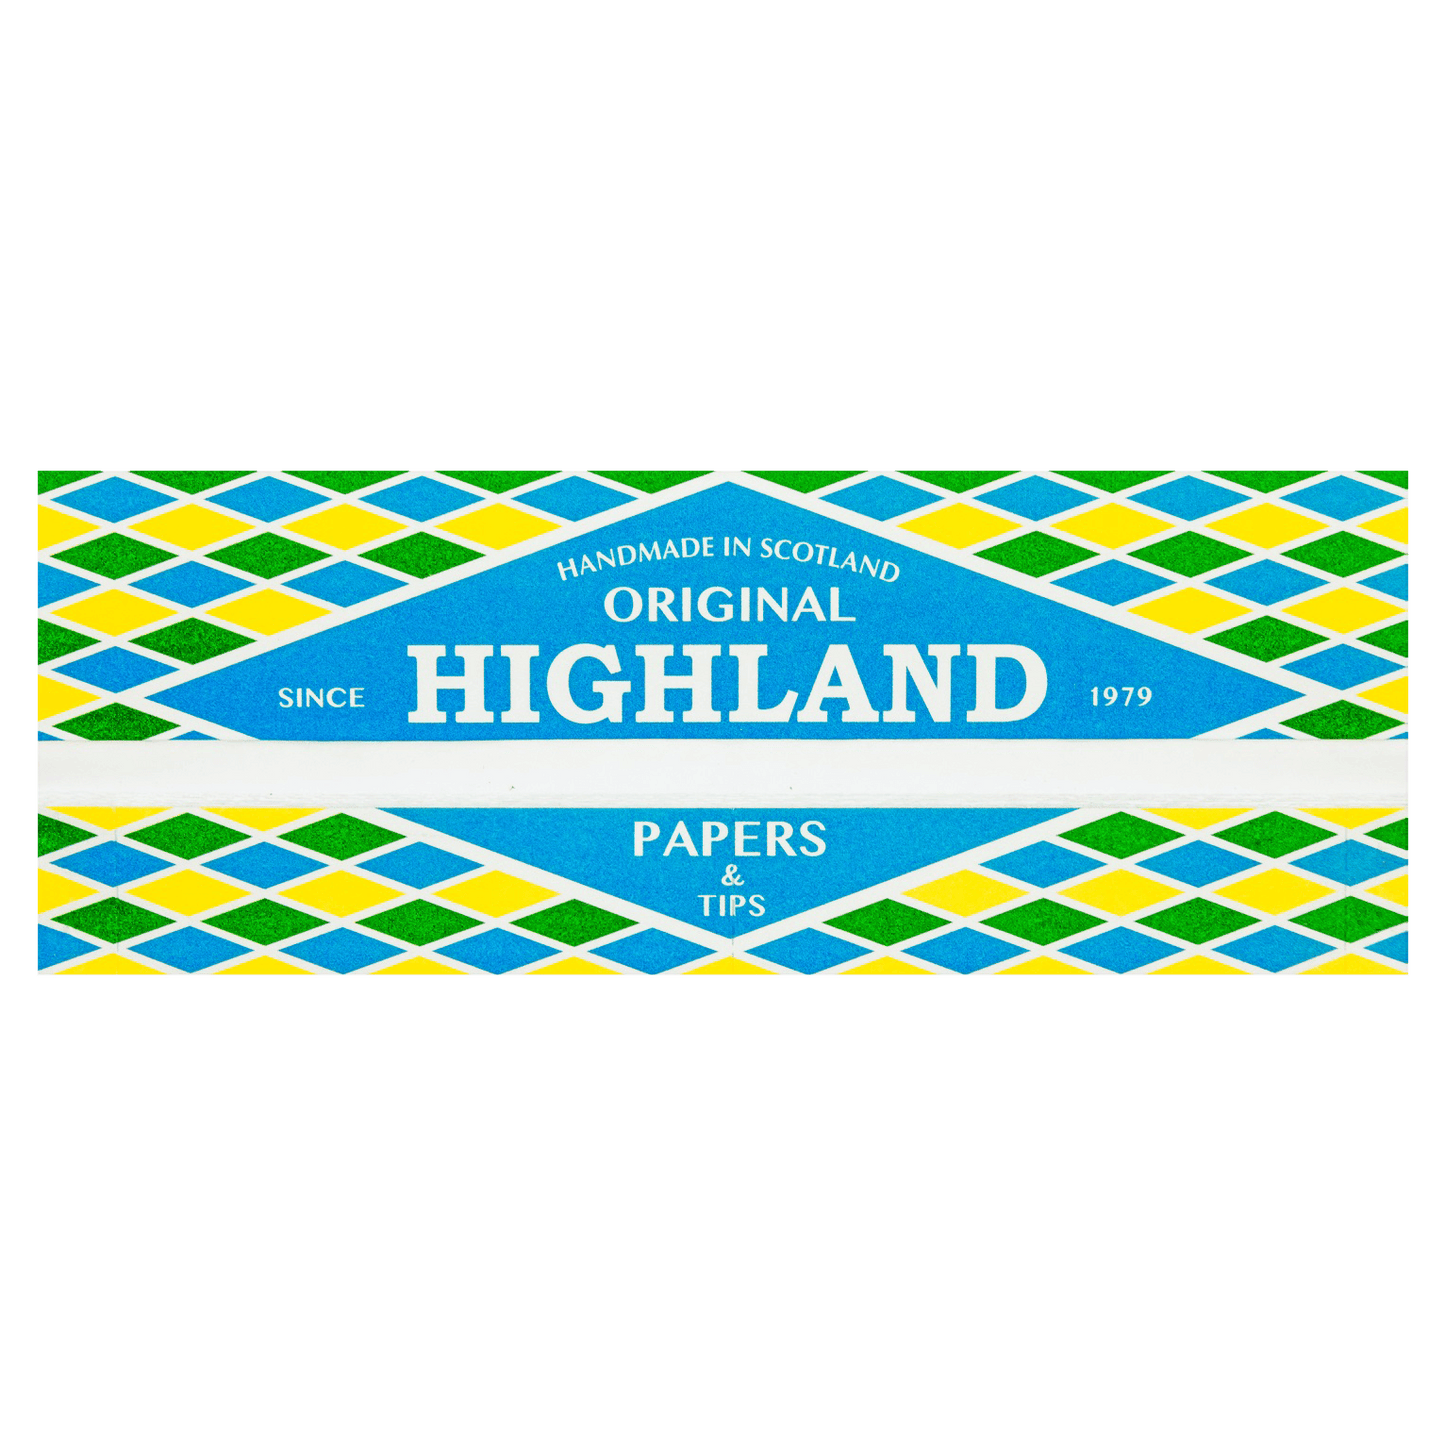 HIGHLAND DOUBLE DECADENCE ORIGINAL XTRA LONG ROLLING PAPERS - munchterm